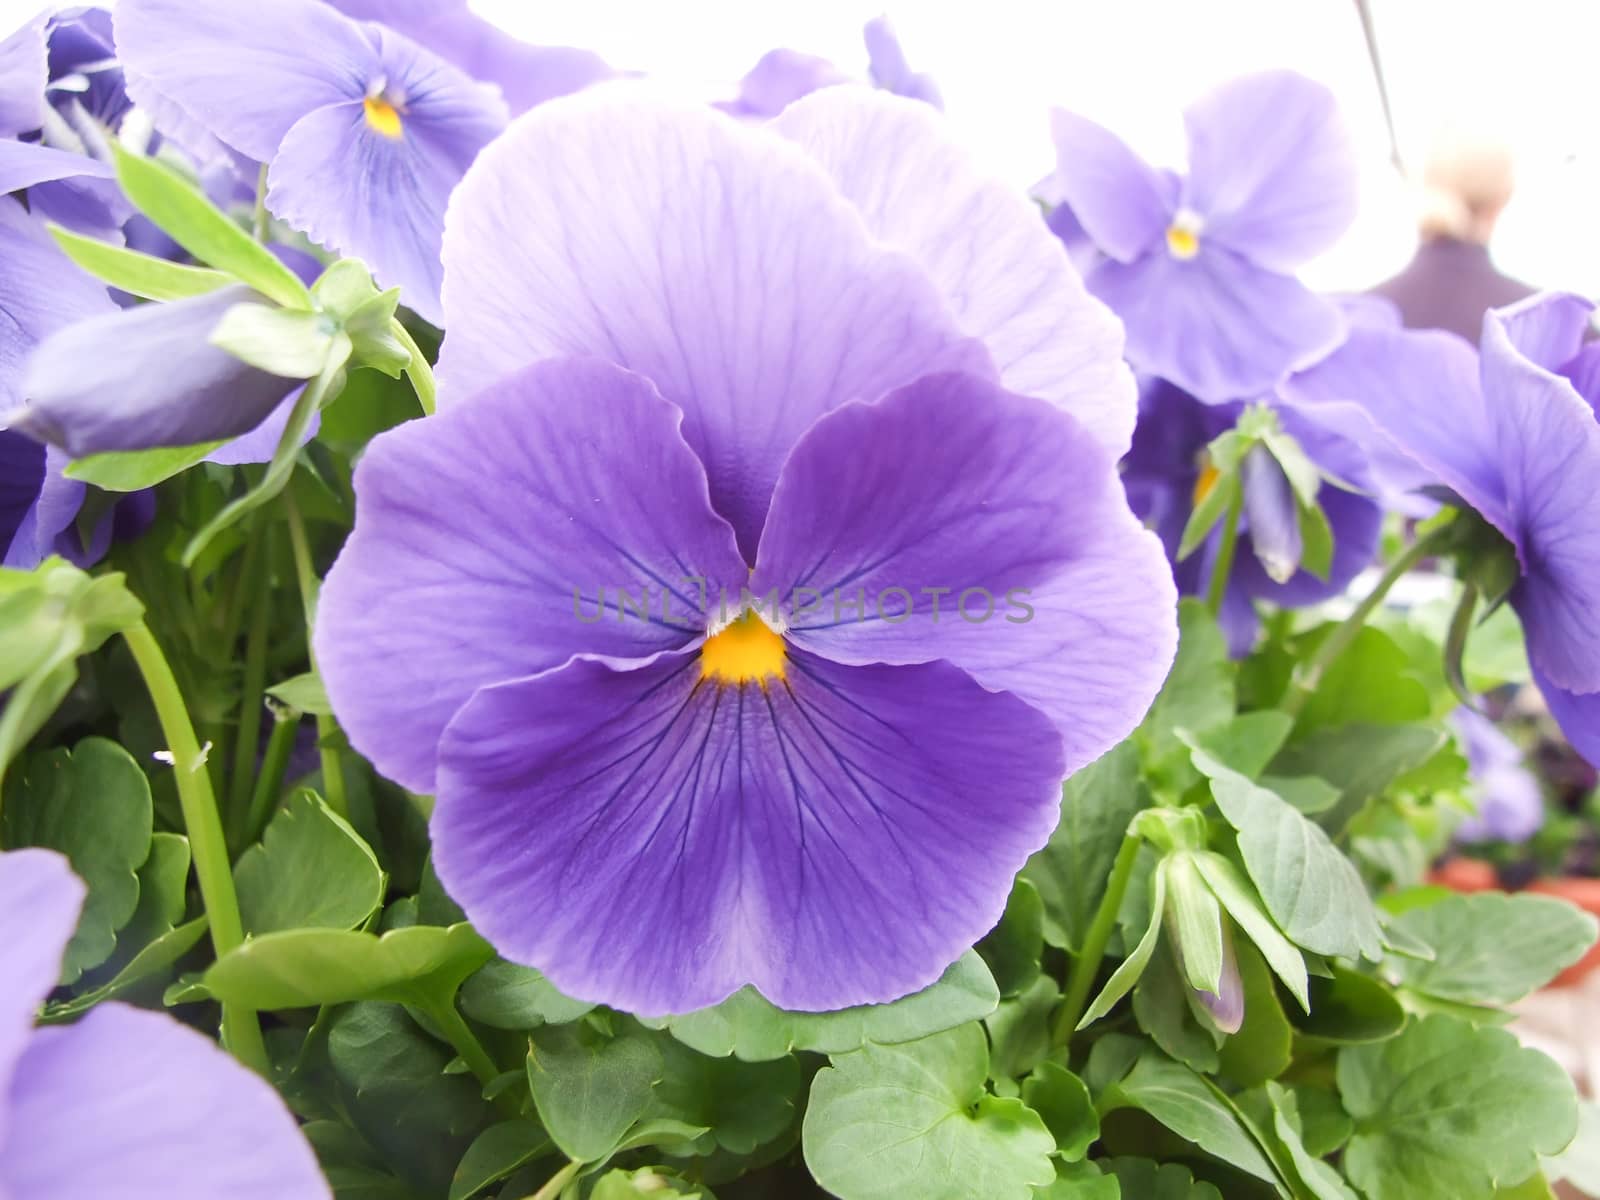 Blue Flower Pansies closeup of colorful pansy flower   by yuiyuize